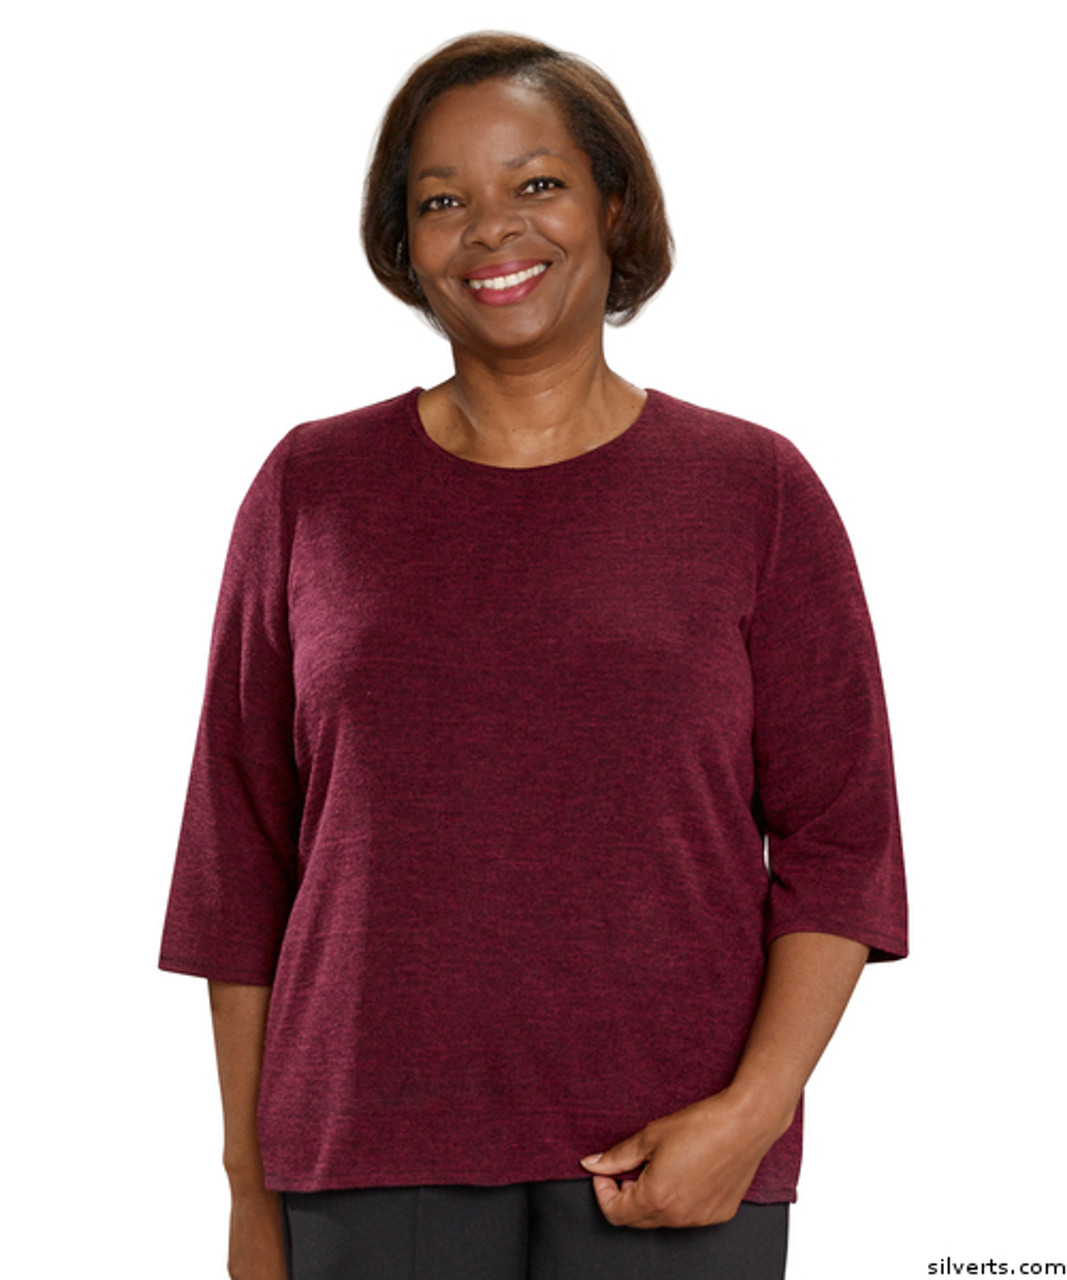 Silvert's 234600301 Adaptive Sweater Top For Women , Size Small, WINE